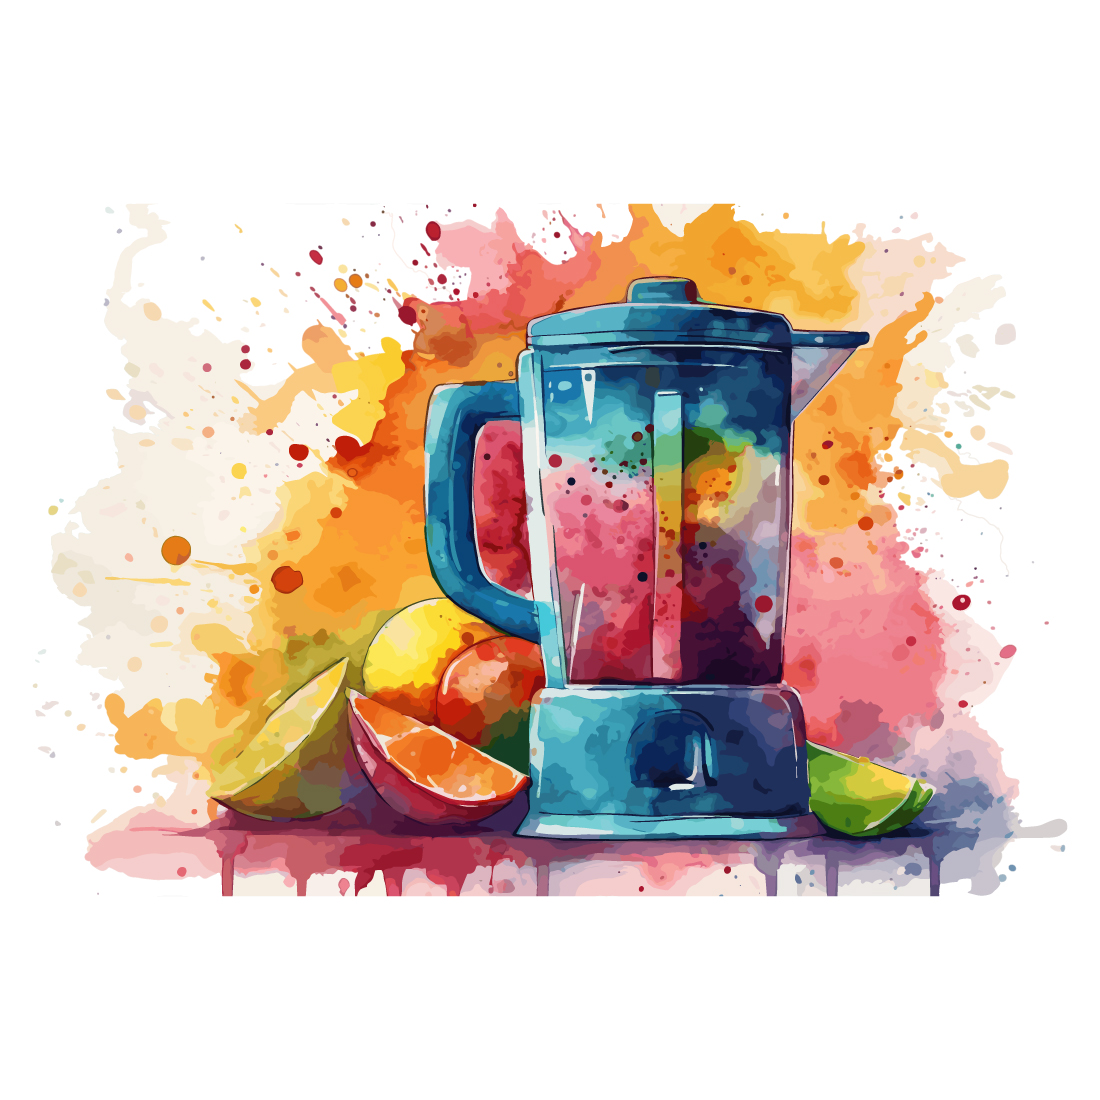 Electrical Juicer Blander machine with splash watercolor cover image.